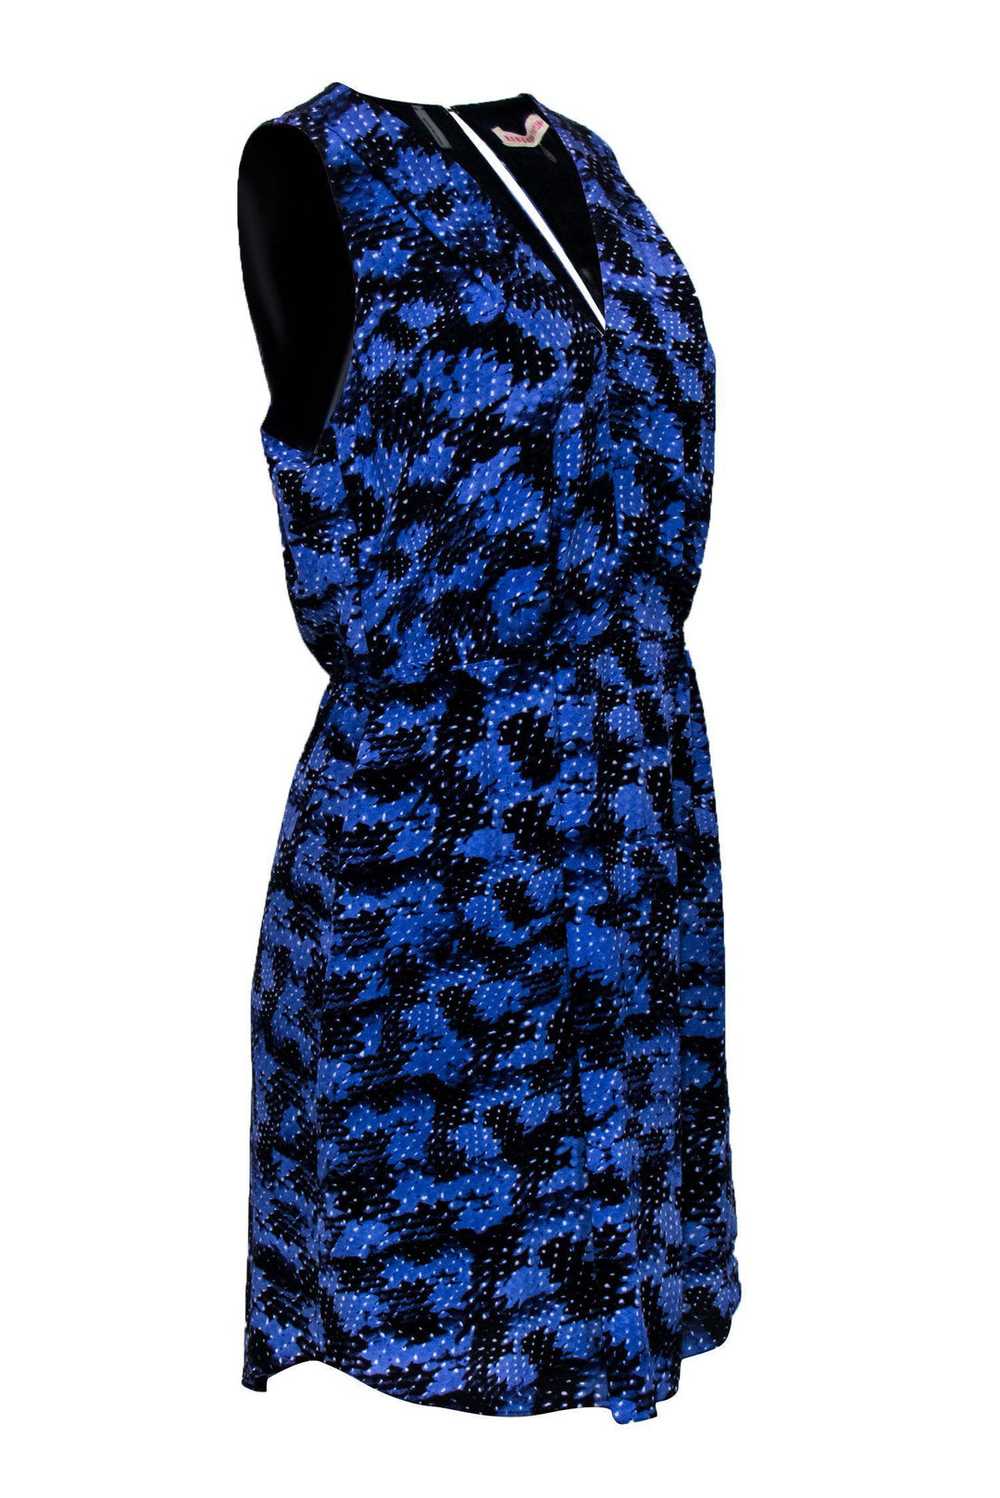 Rebecca Taylor - Blue & Black Abstract Print Dres… - image 2